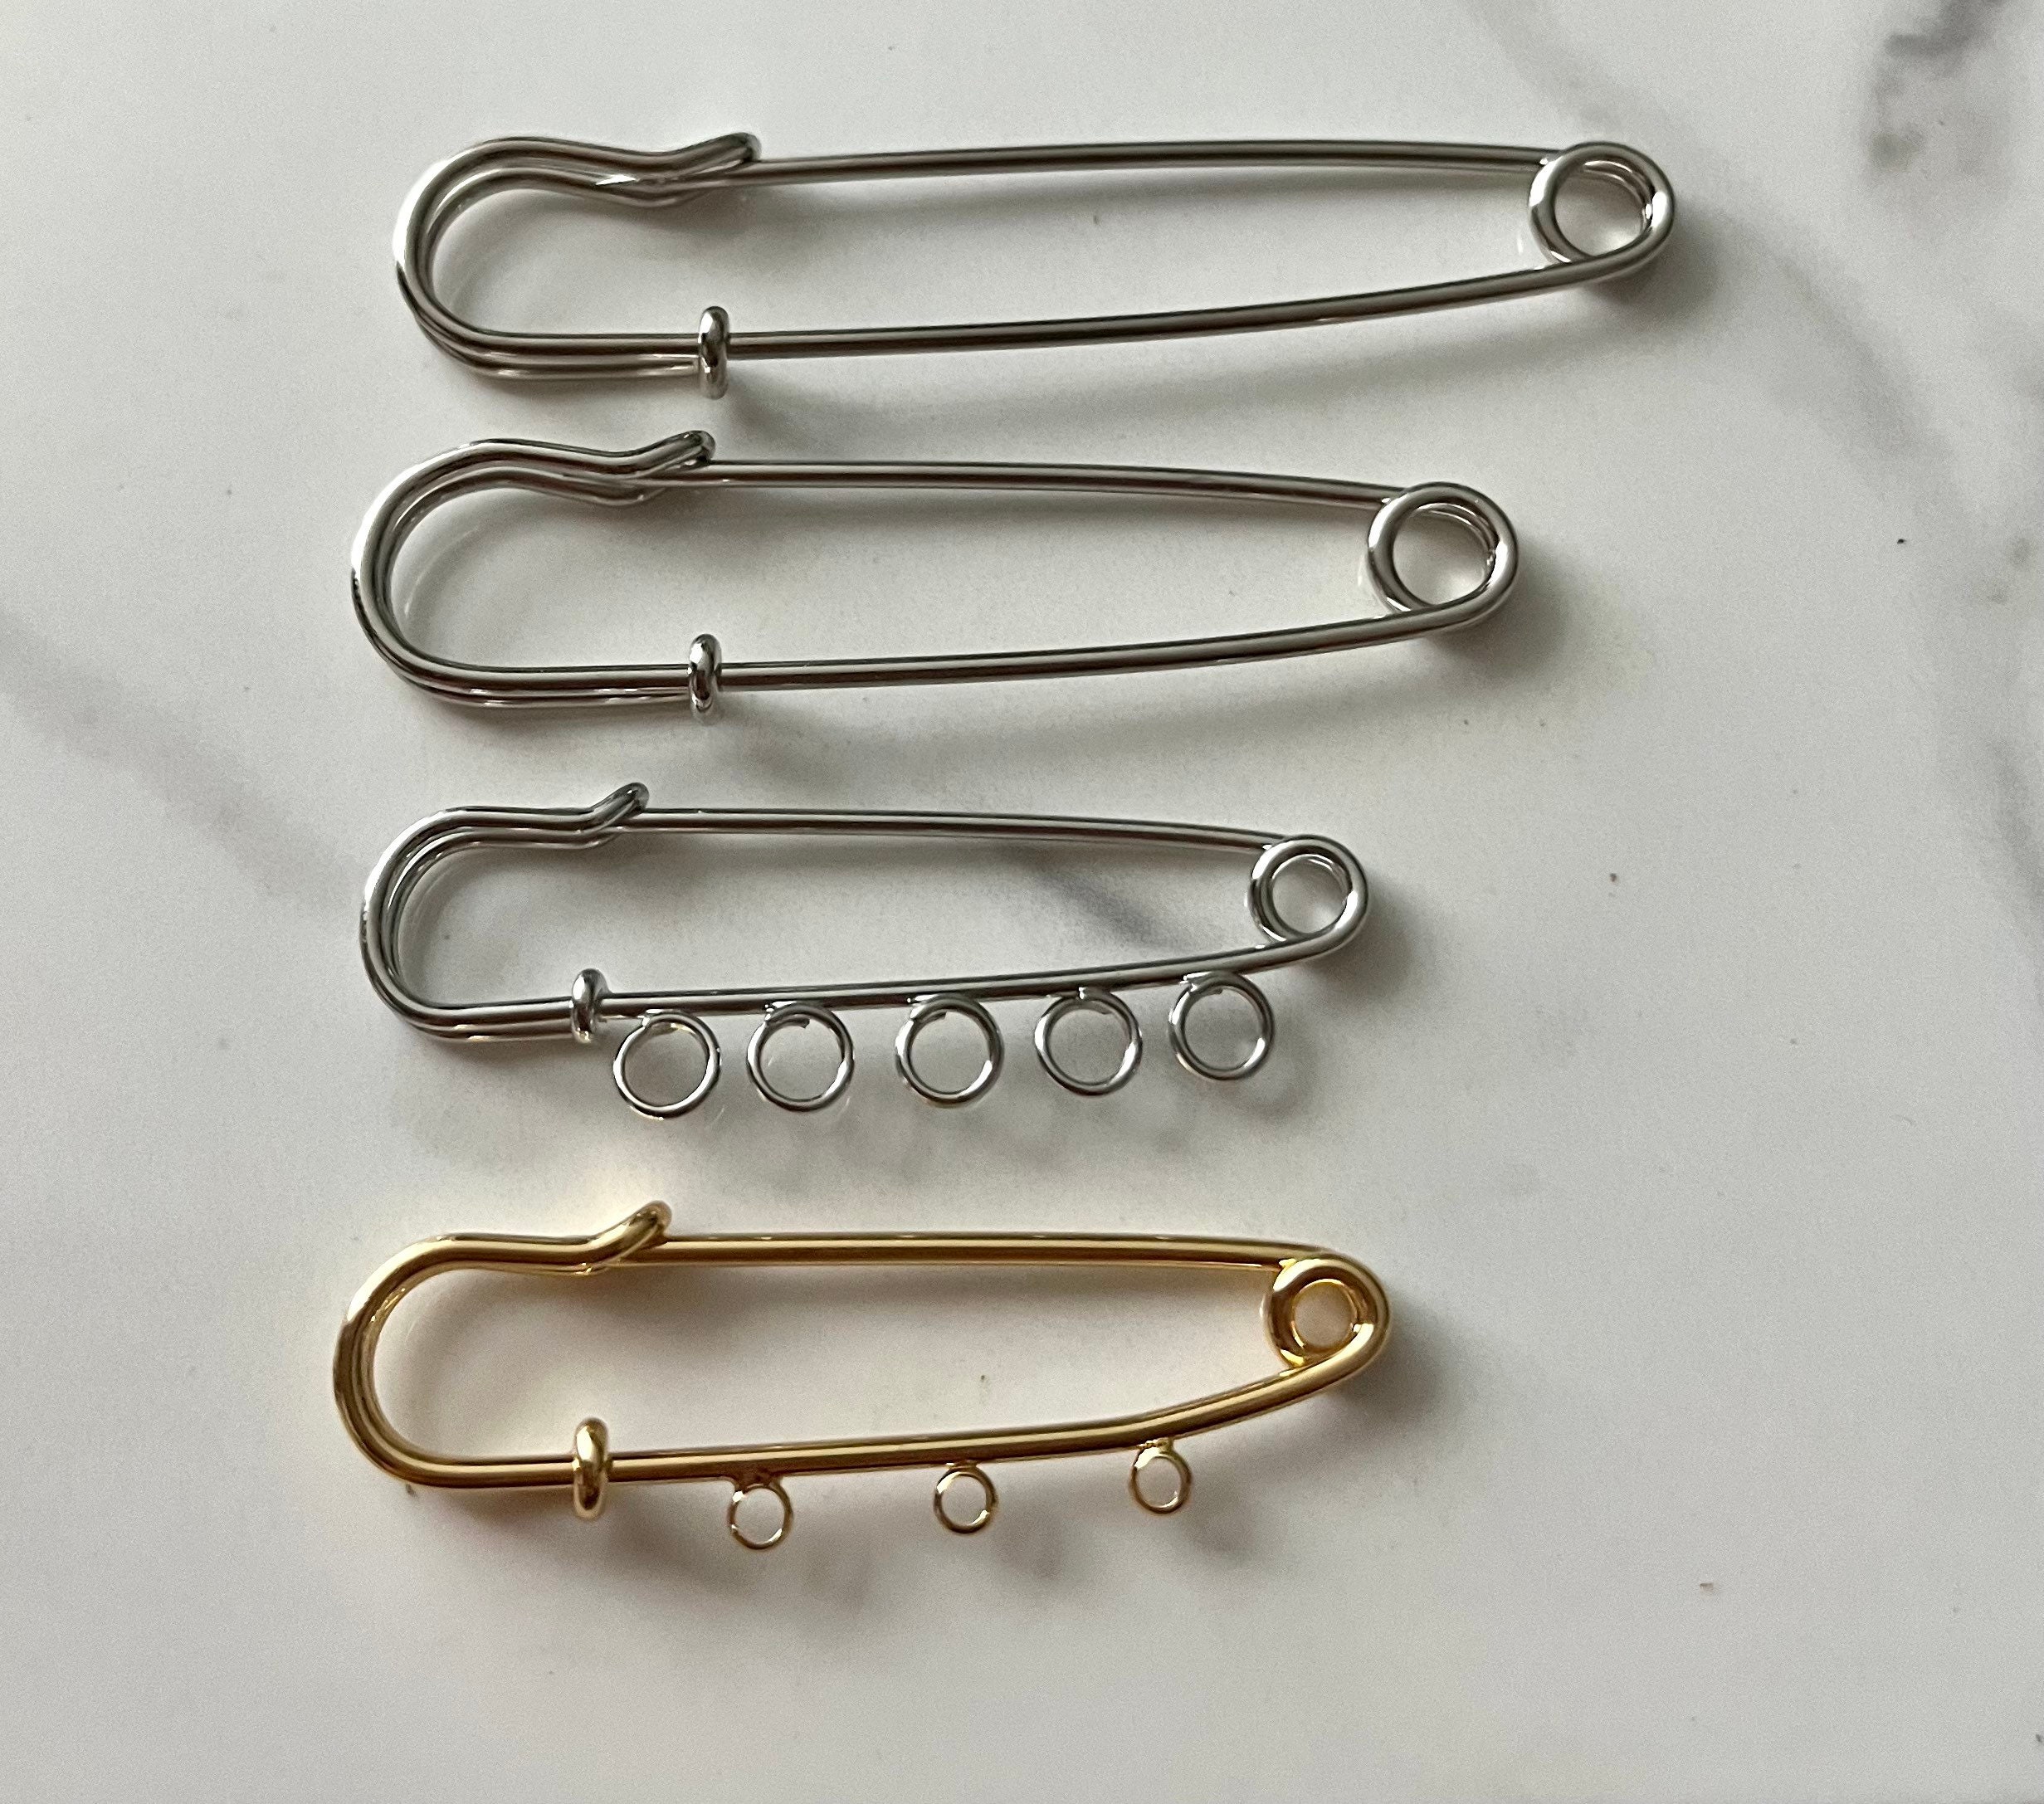 Gold Plated Sterling Silver Safety Pin Brooch with Hanging Flowers